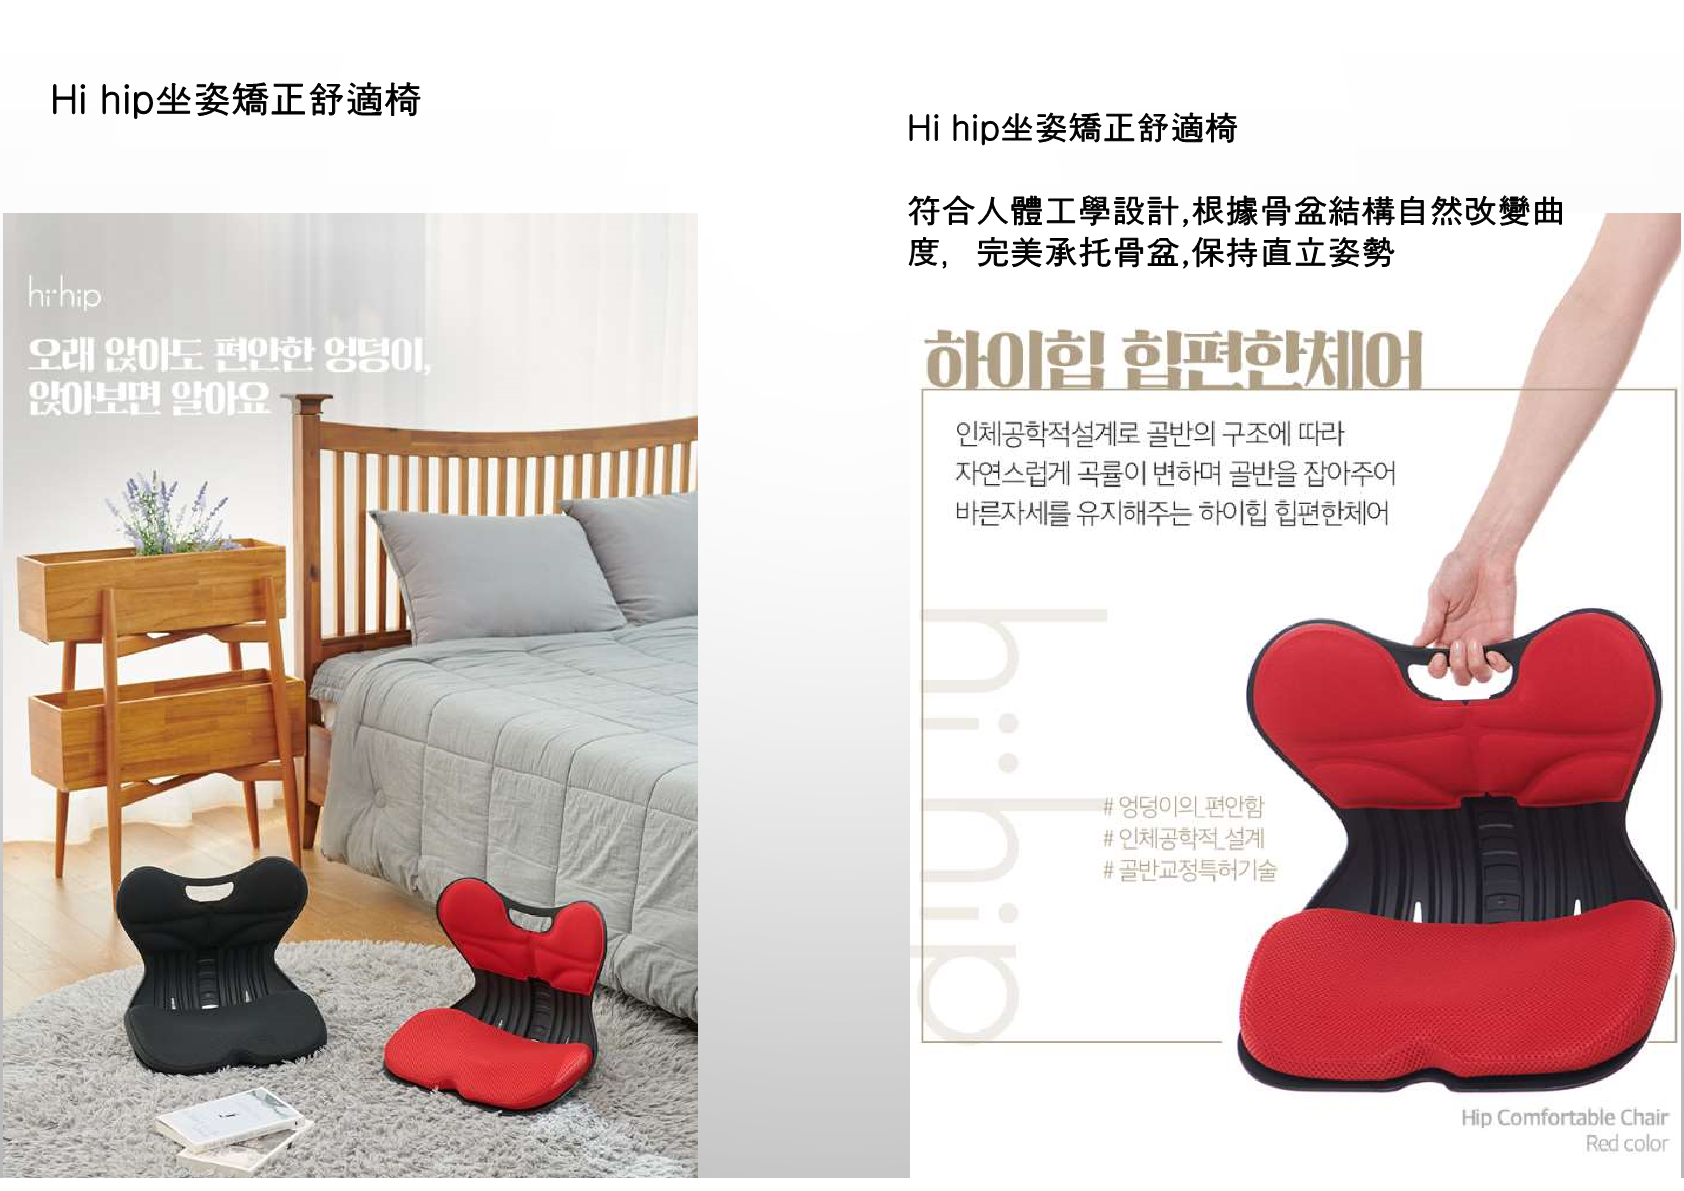 hi-hip-custion-chair-product-introduction5.png